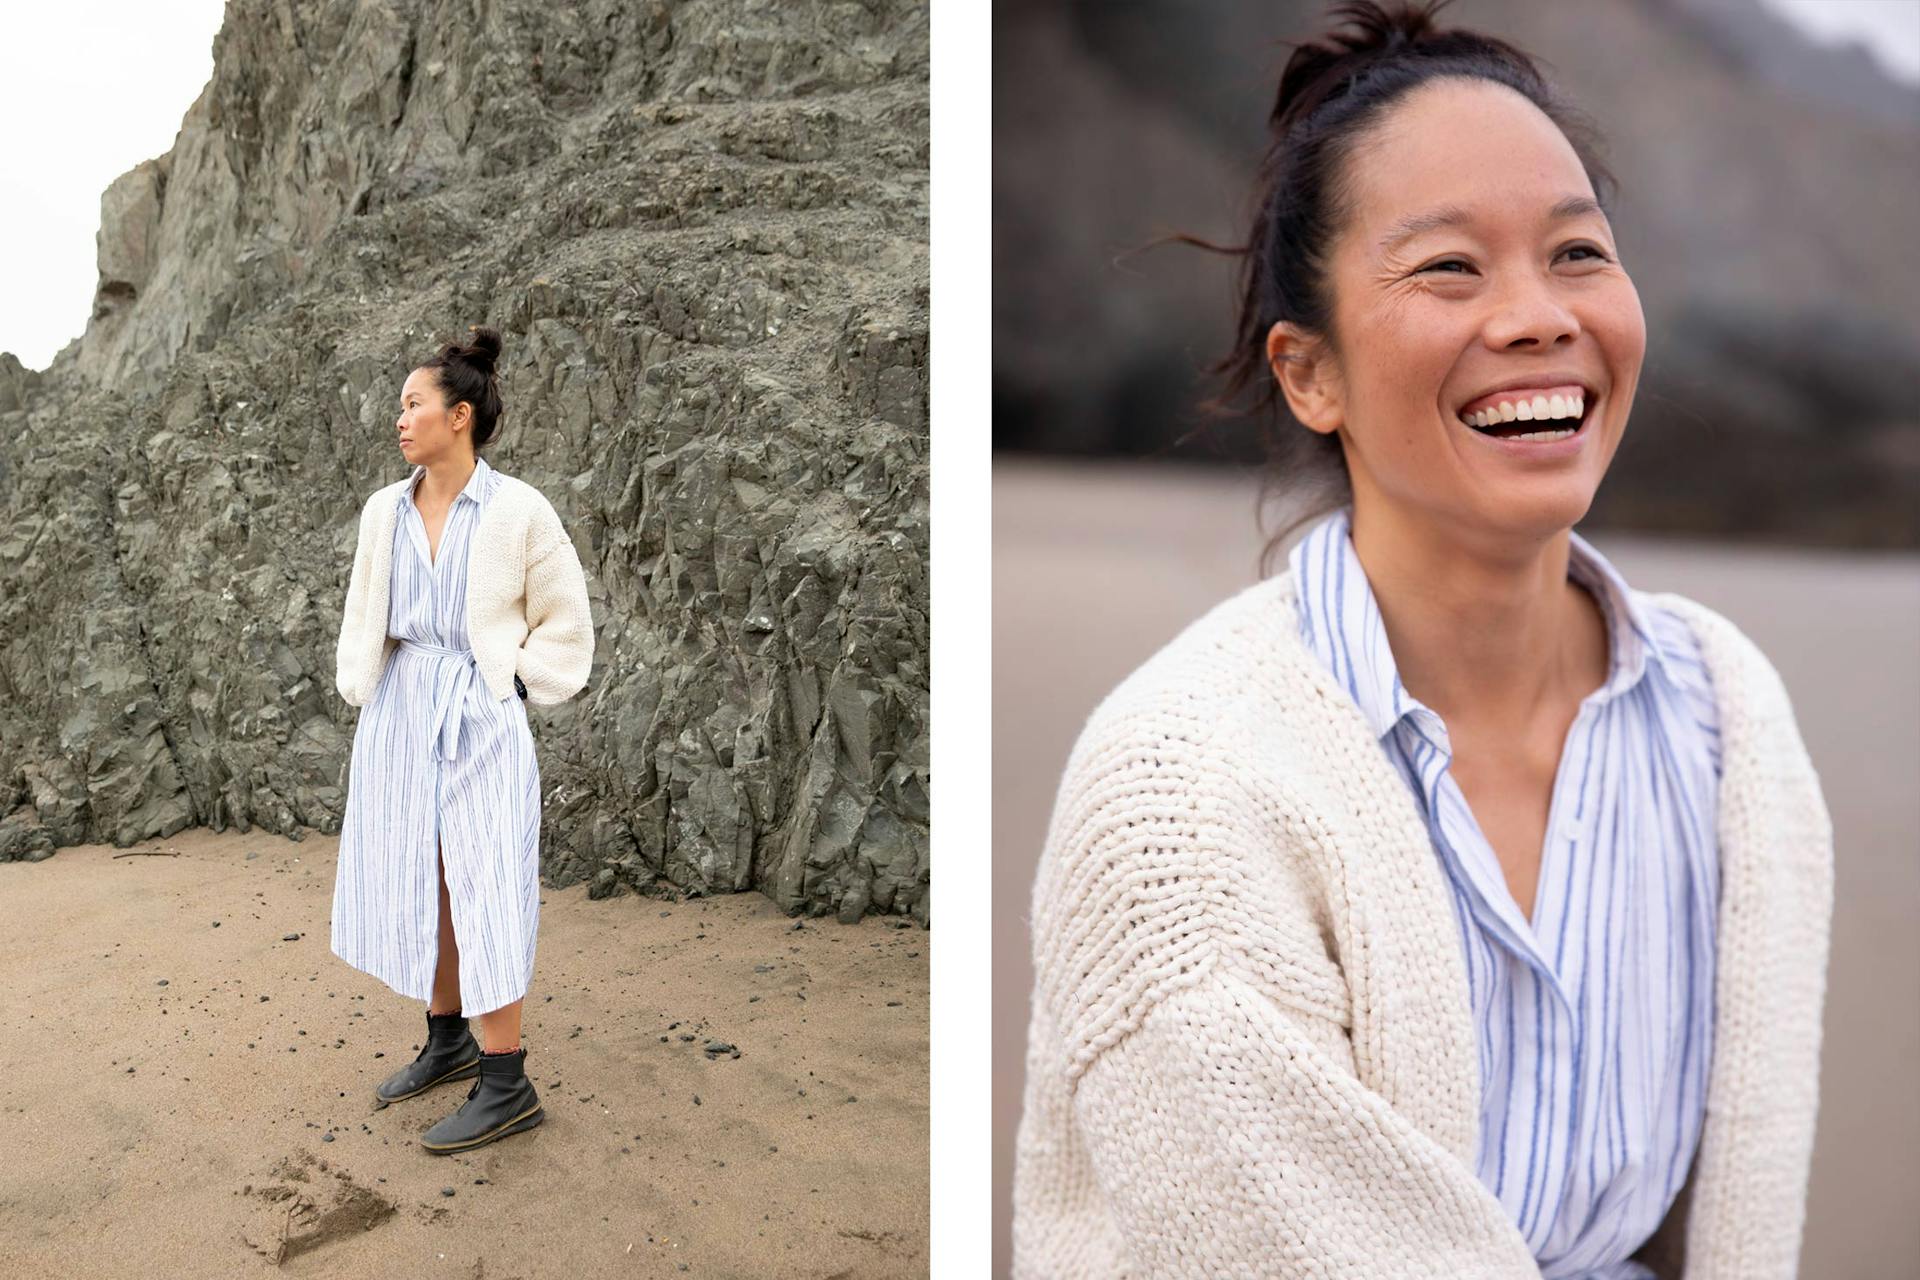 Two images. The first shows Bonnie Tsui wearing a light outfit. The second shows Bonnie Tsui laughing